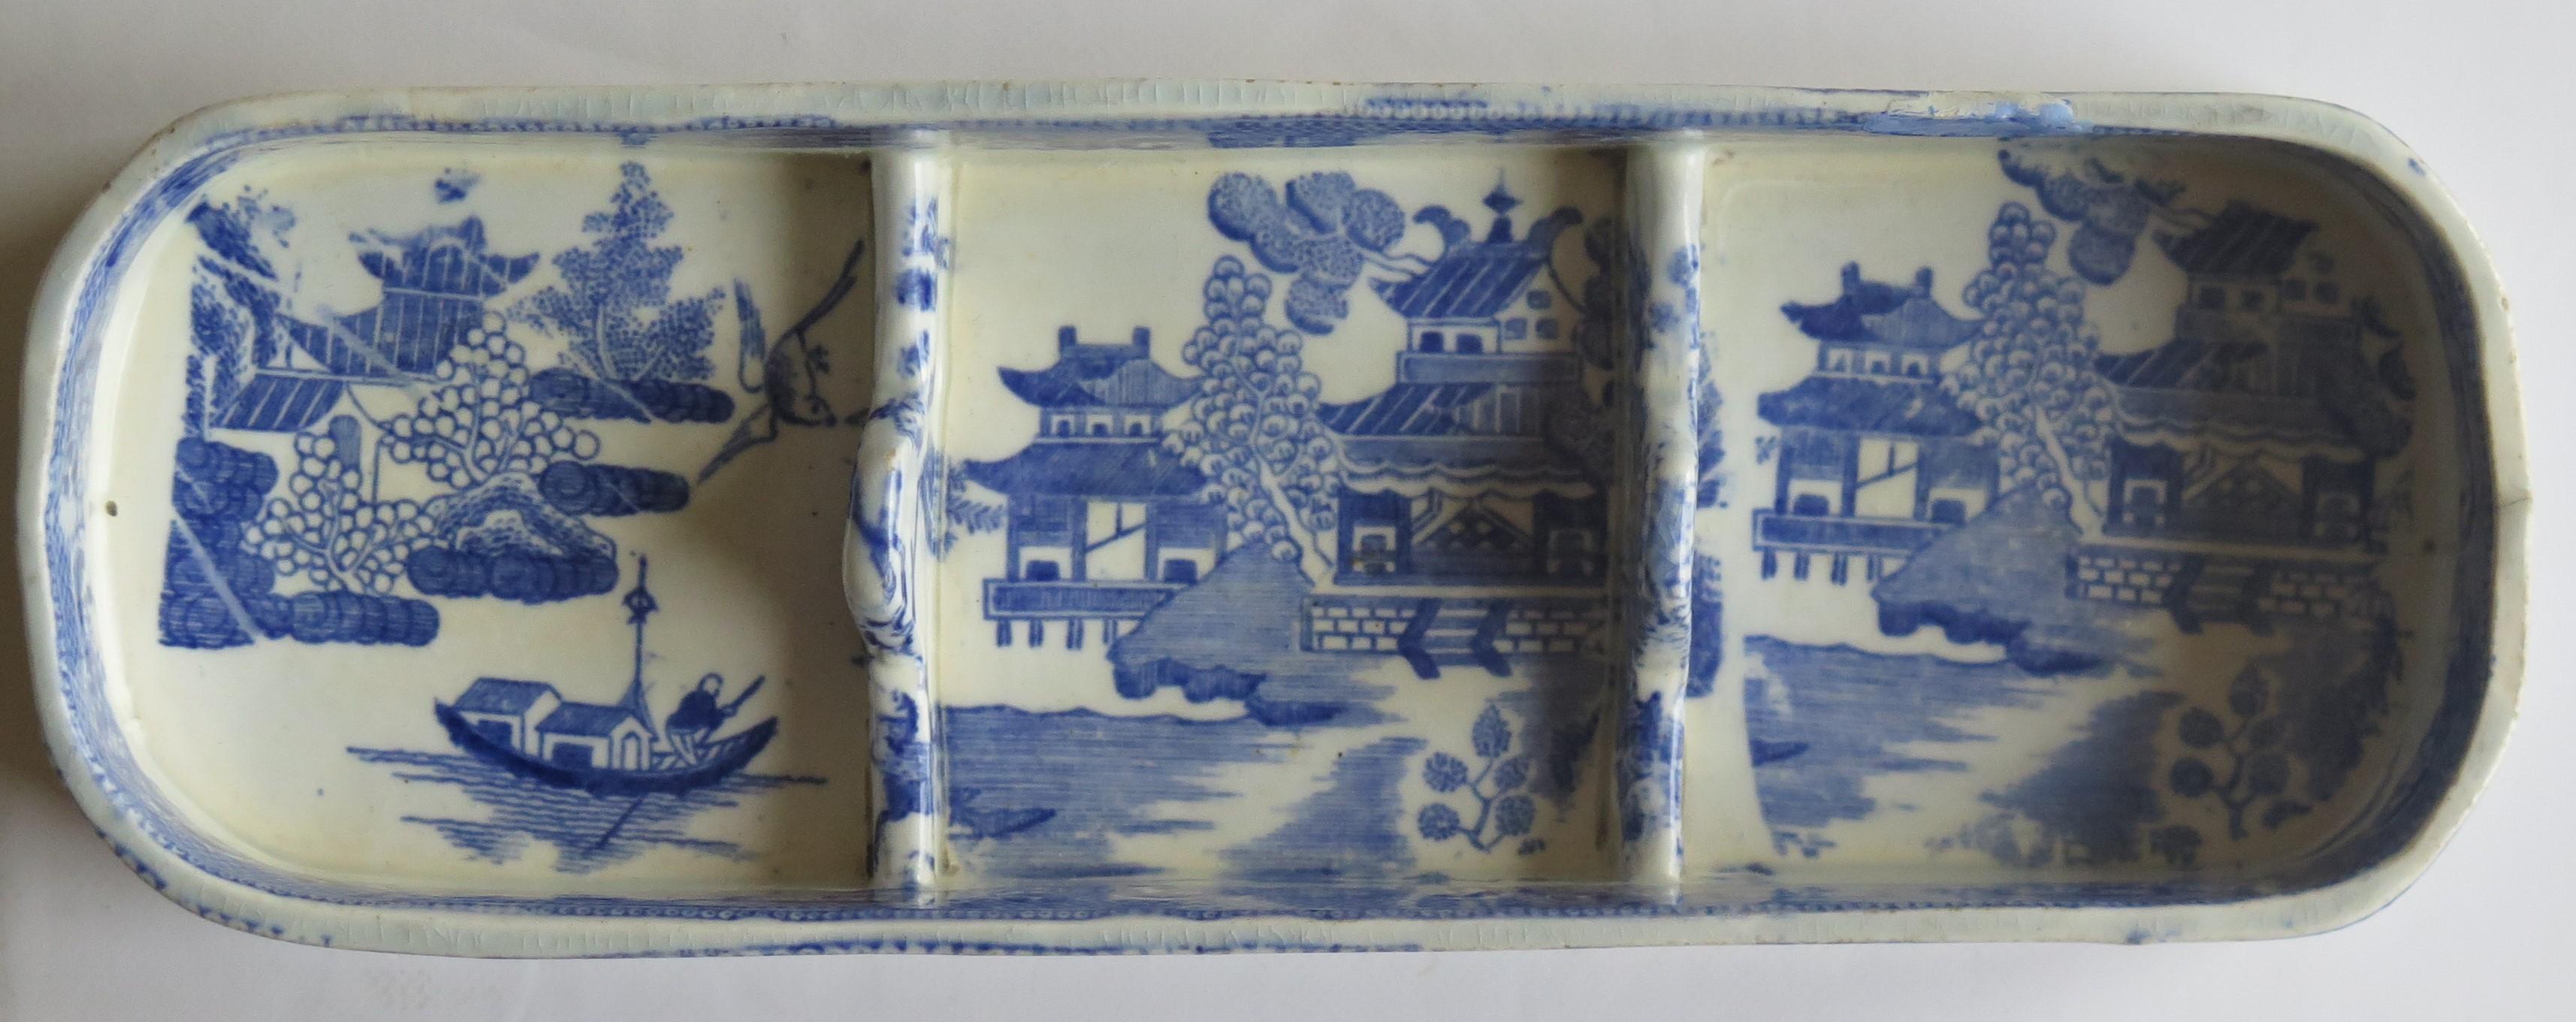 18th Century Rare Early Spode Pen Tray Pearlware Blue and White Willow Pattern, circa 1800